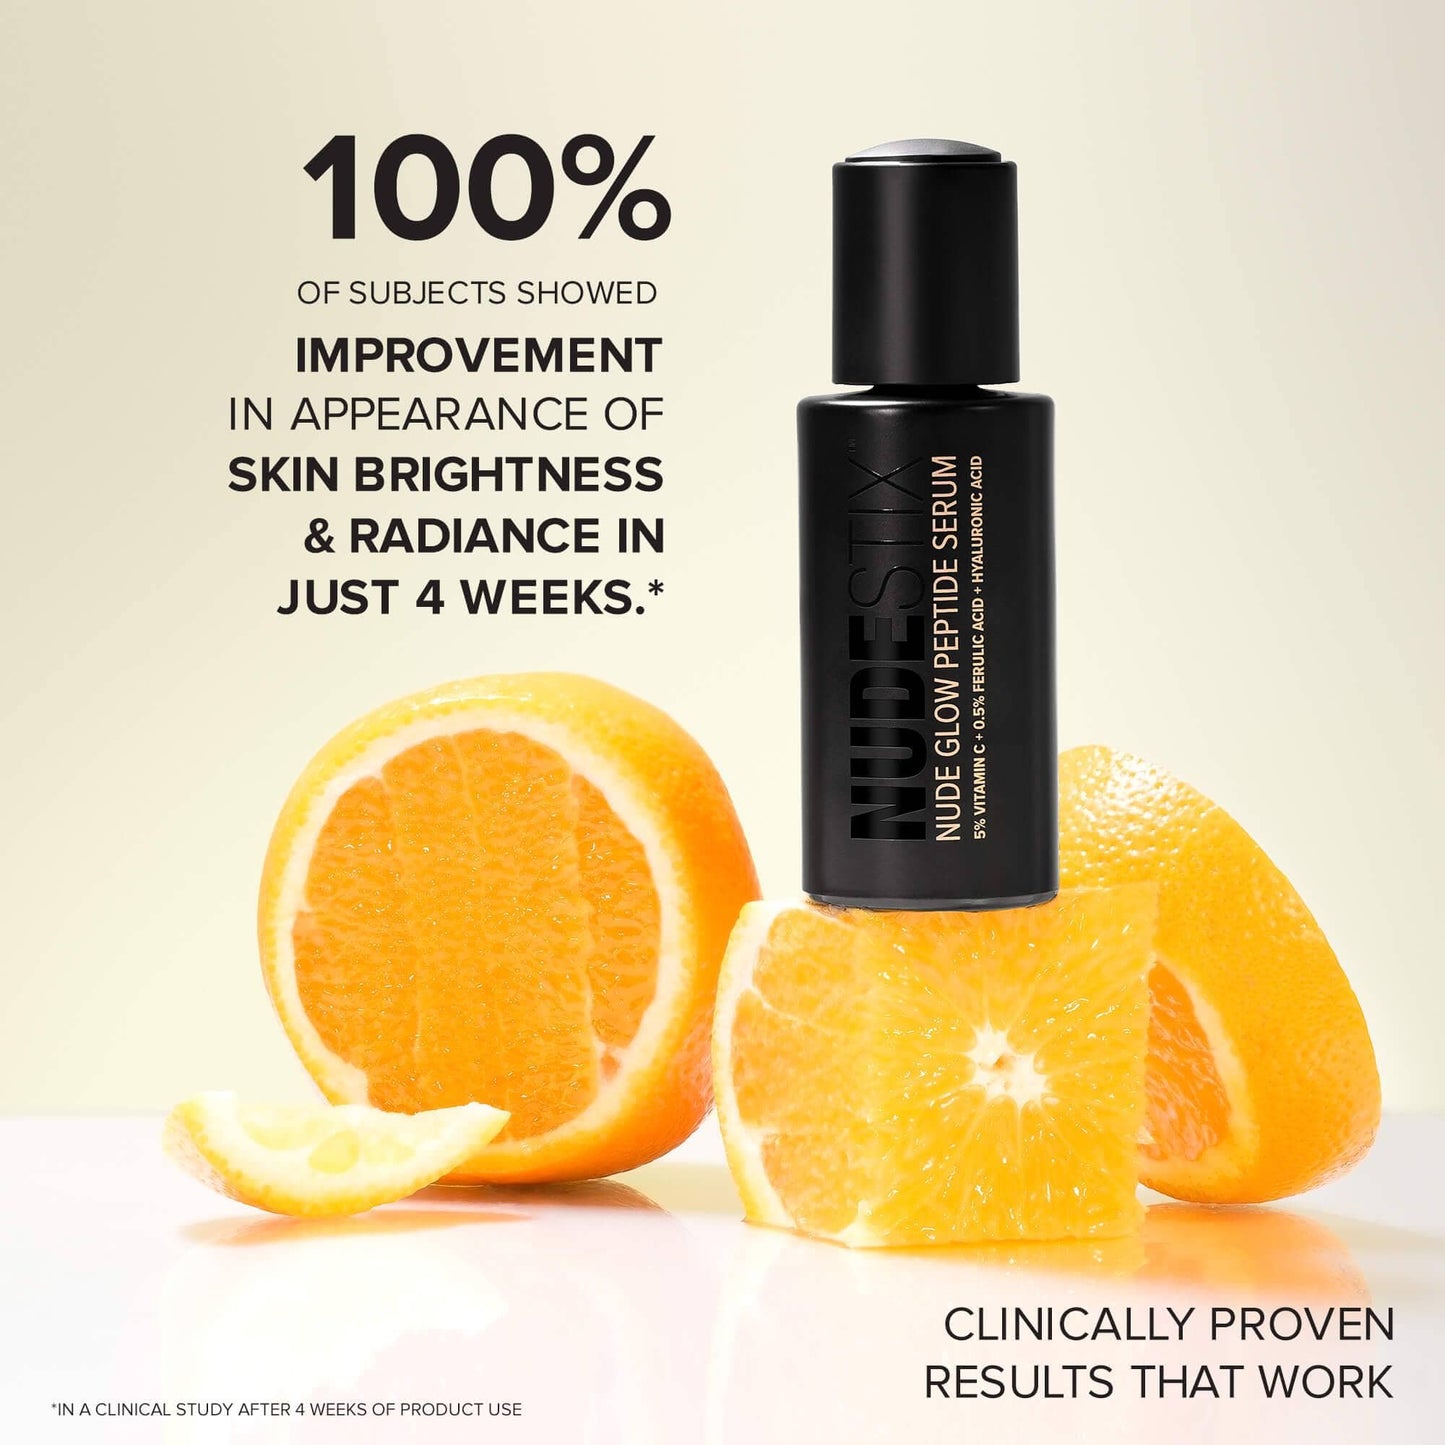 100% of subjects showed improvement in appearance of skin brightness & radiance in 4 weeks